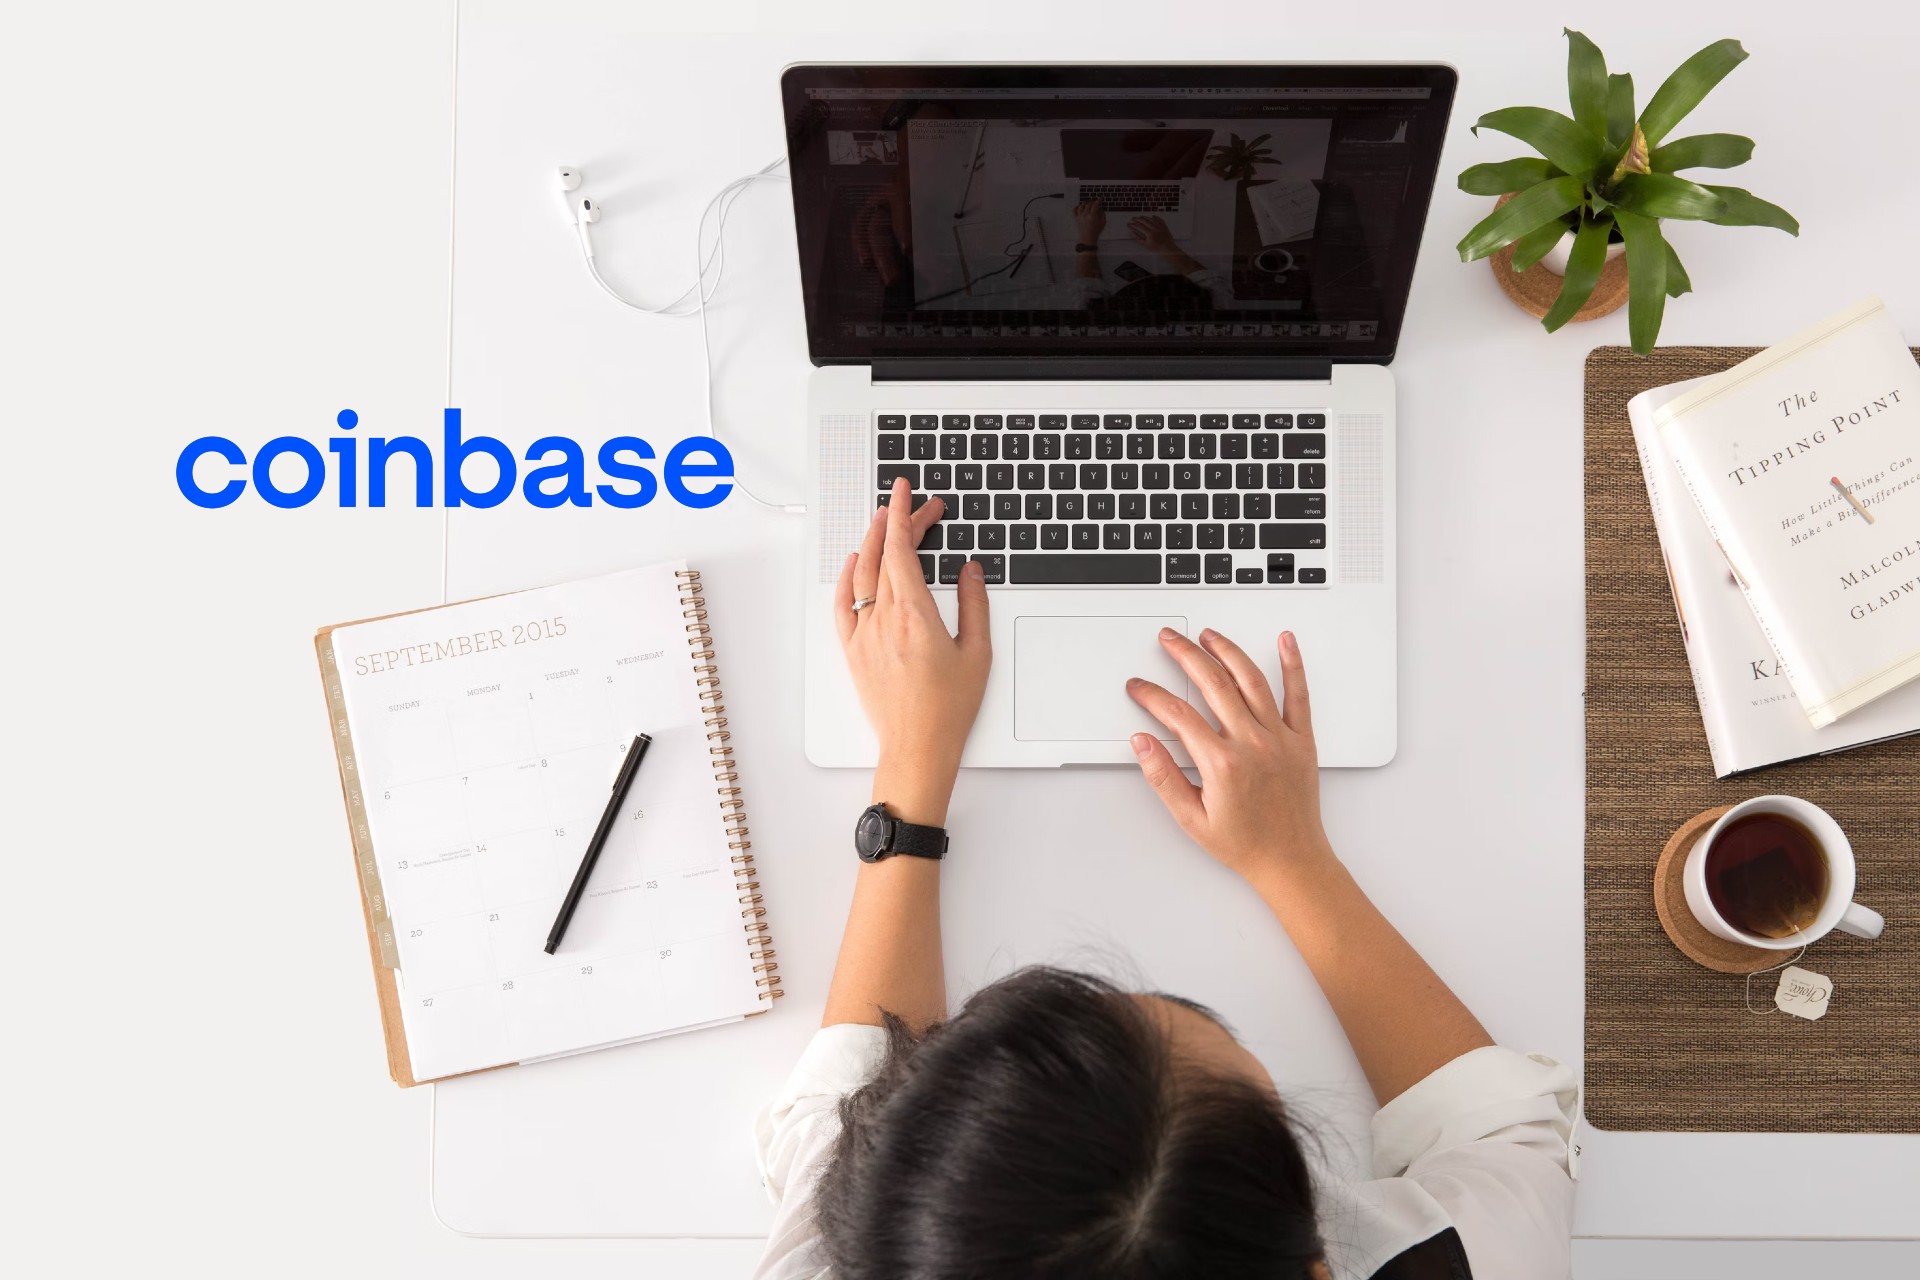 coinbase learn and earn reddit